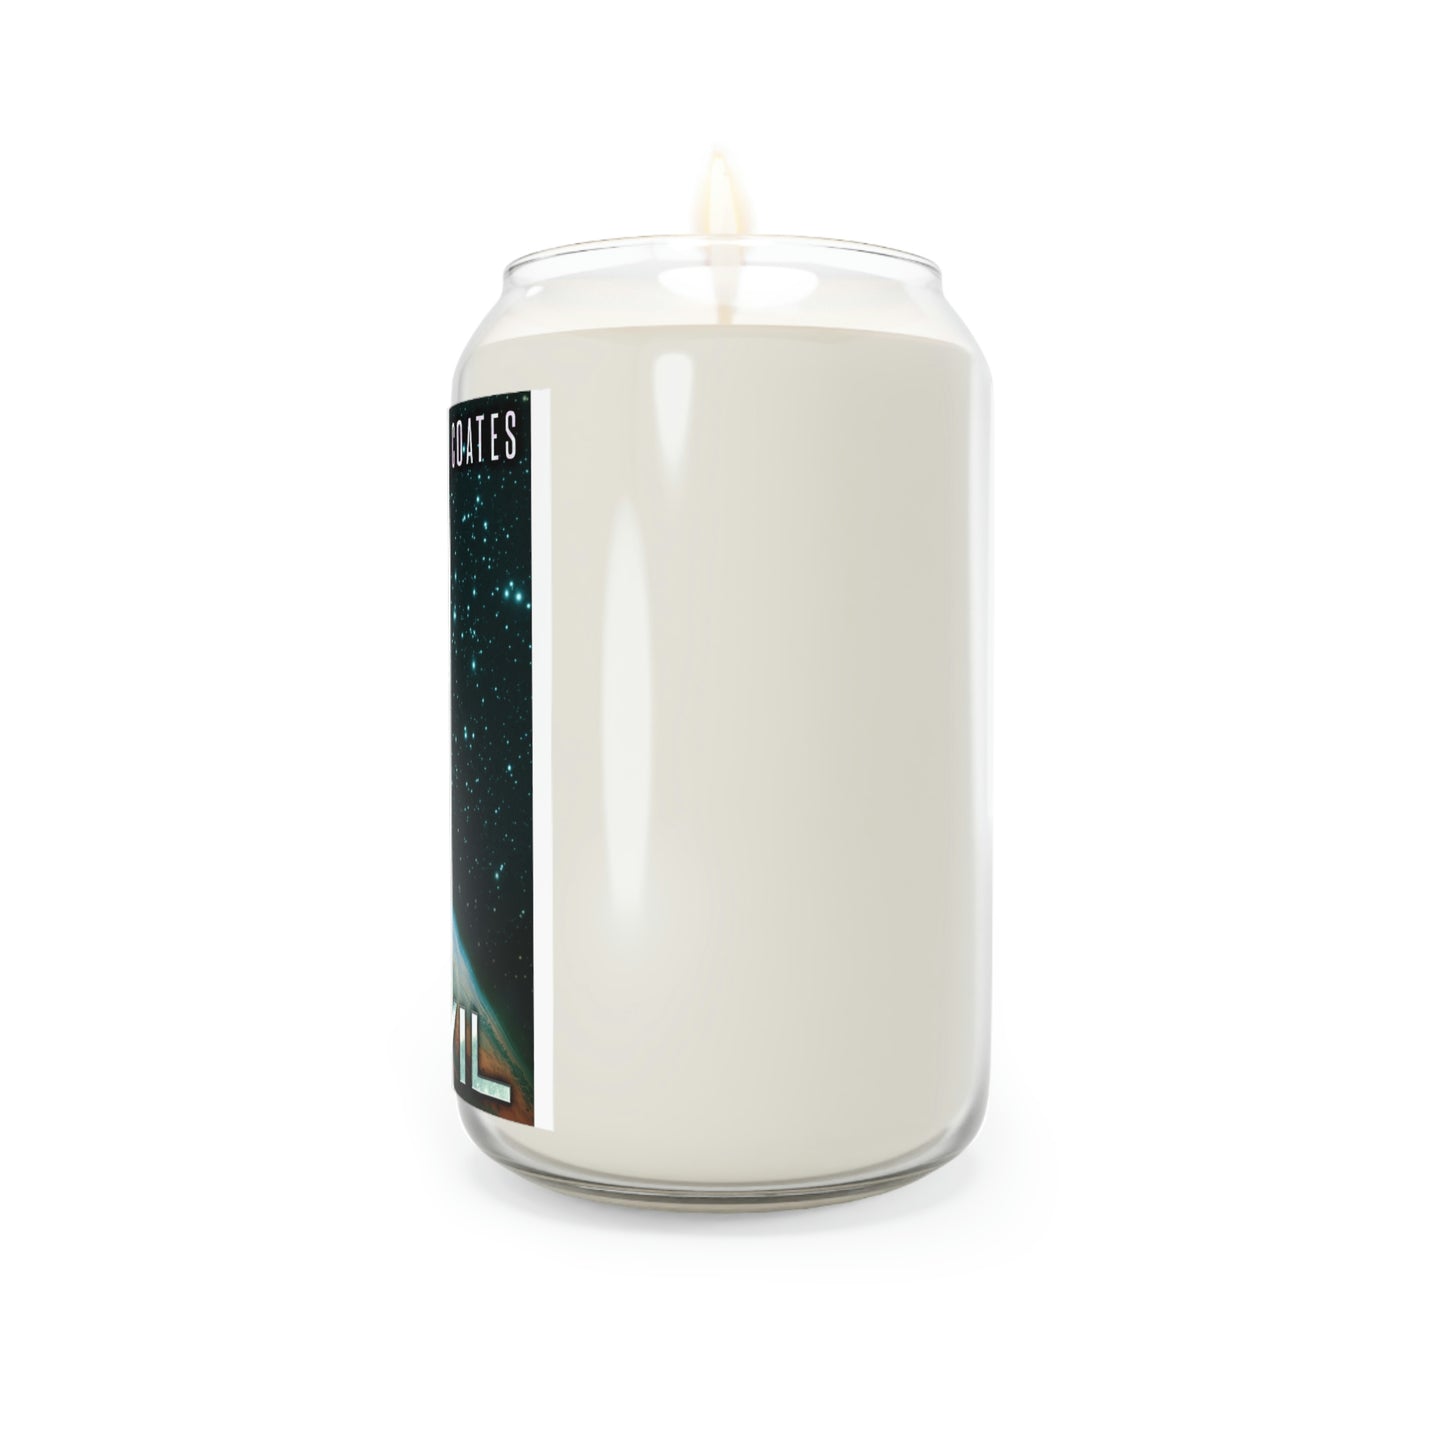 The Anvil - Scented Candle